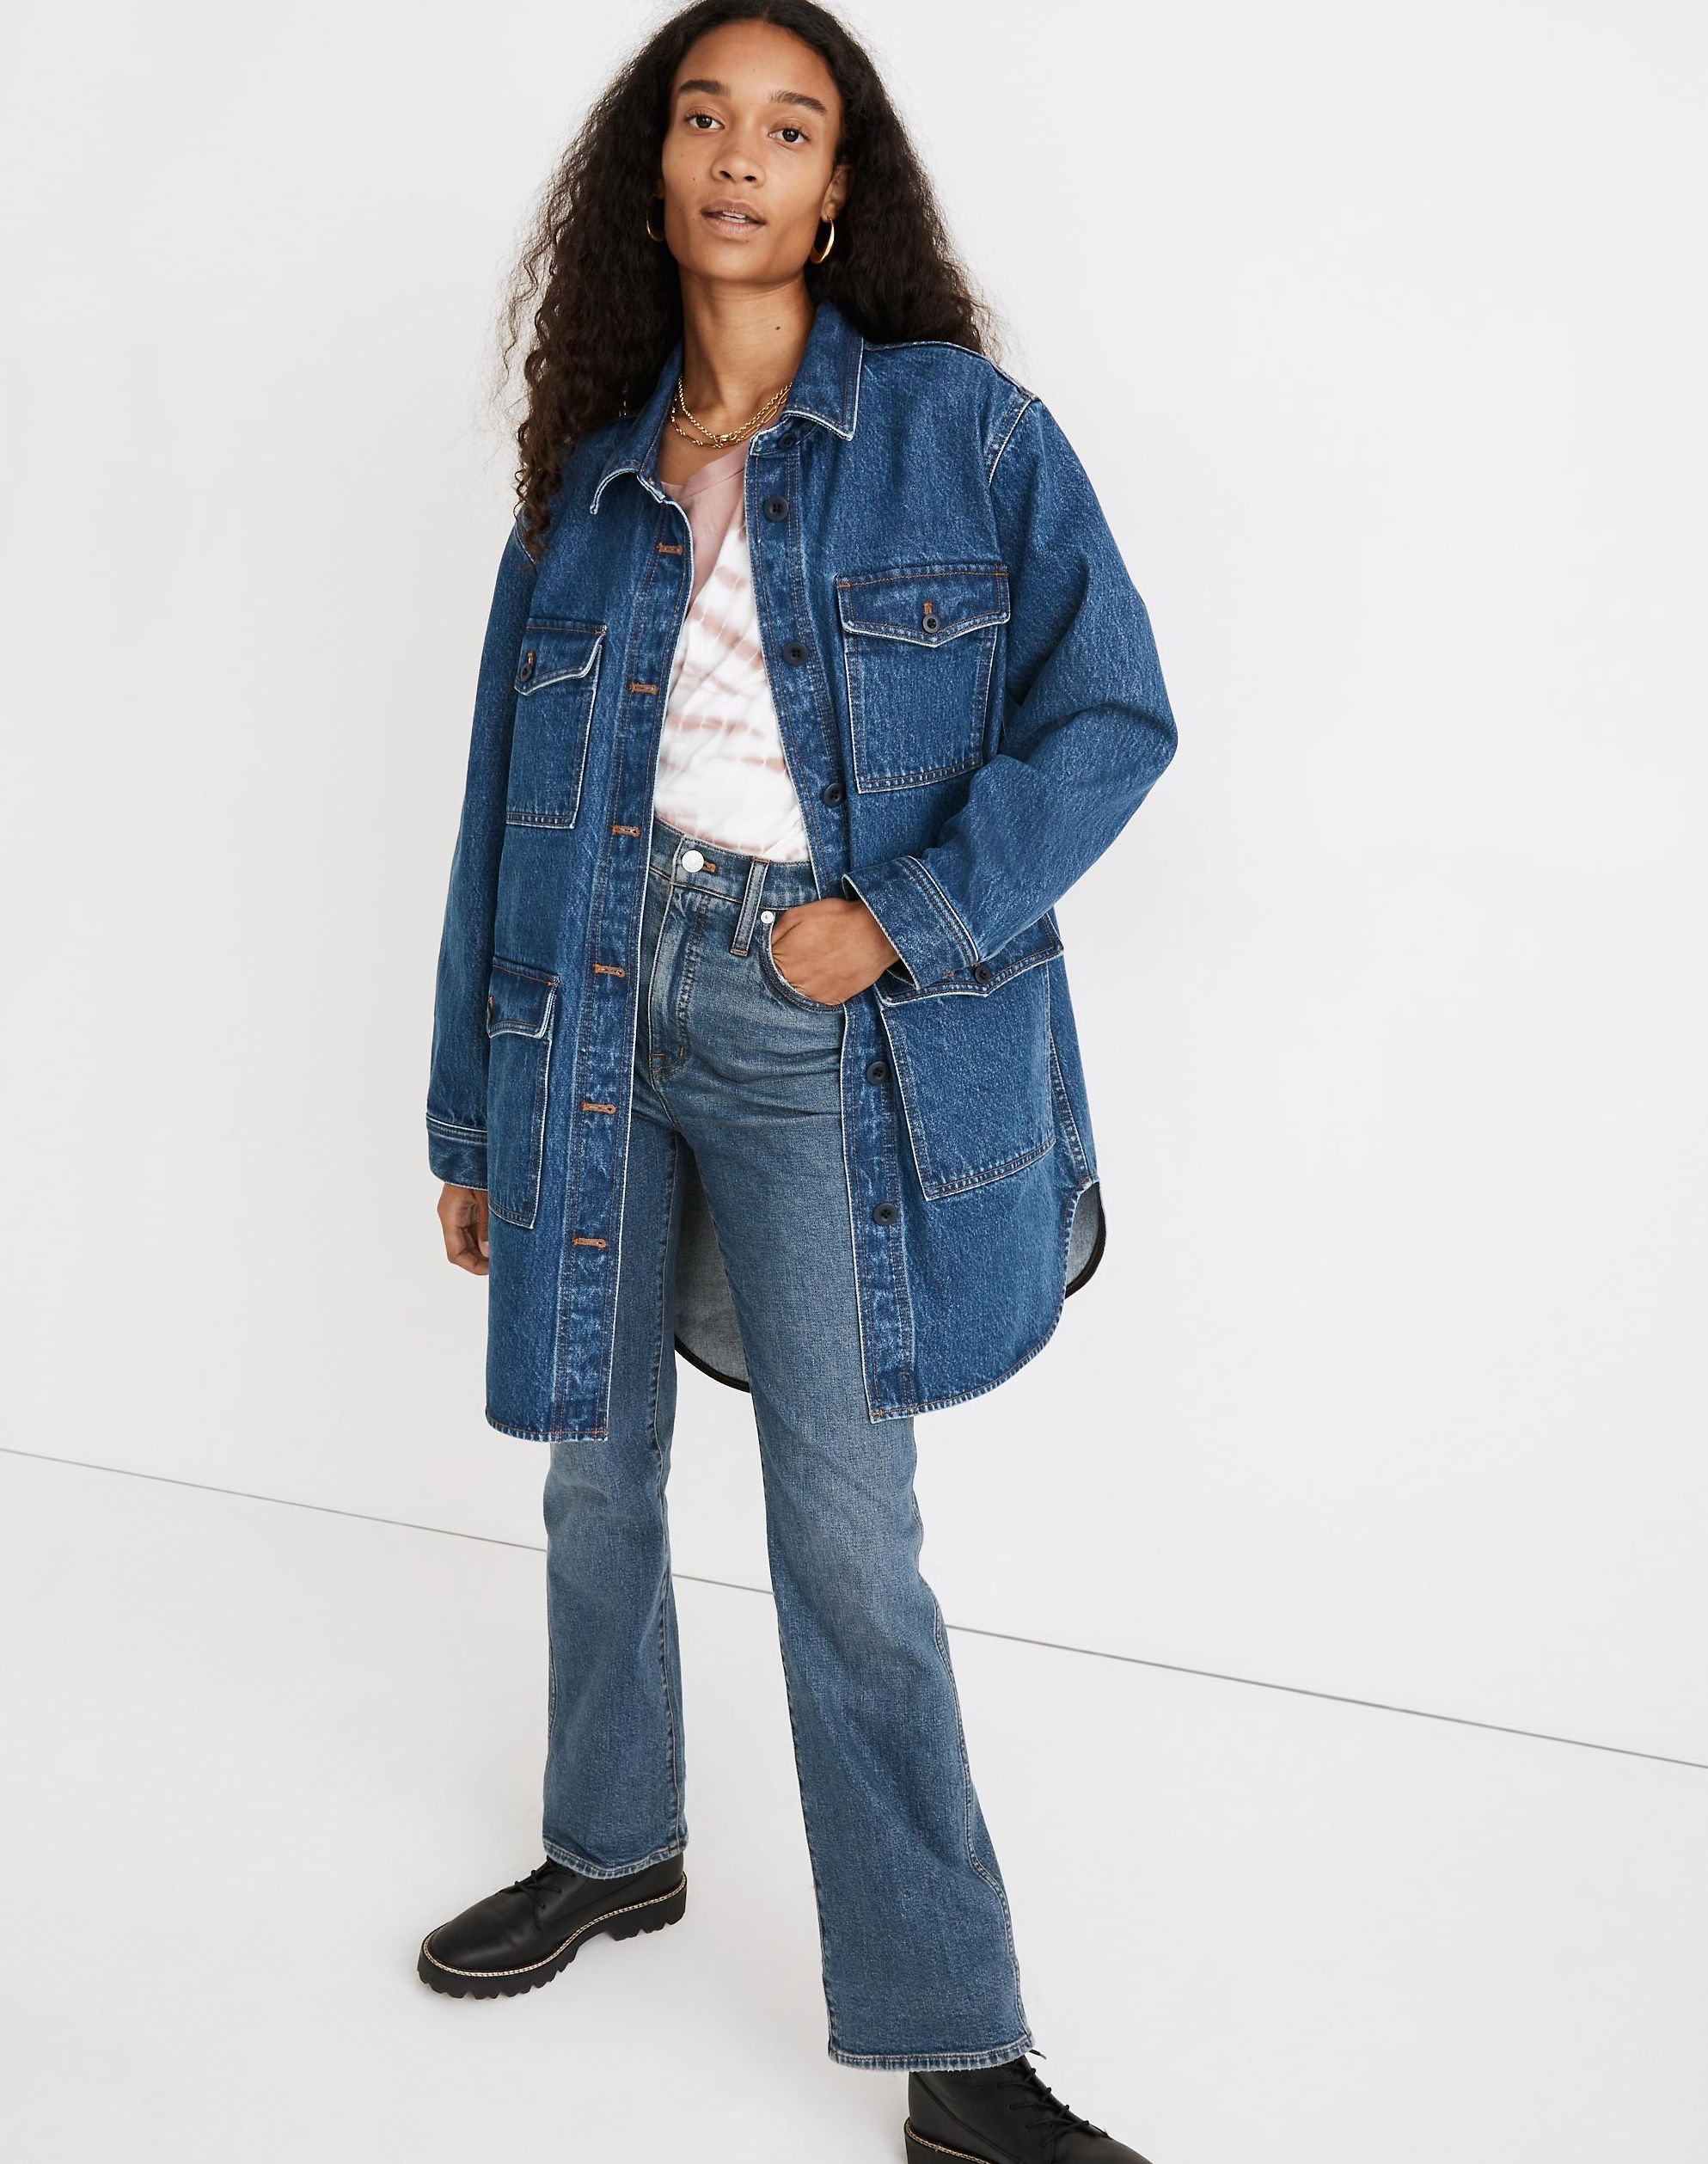 Lightweight Jackets For Fall — Fall 2021 Fashion - Brit + Co